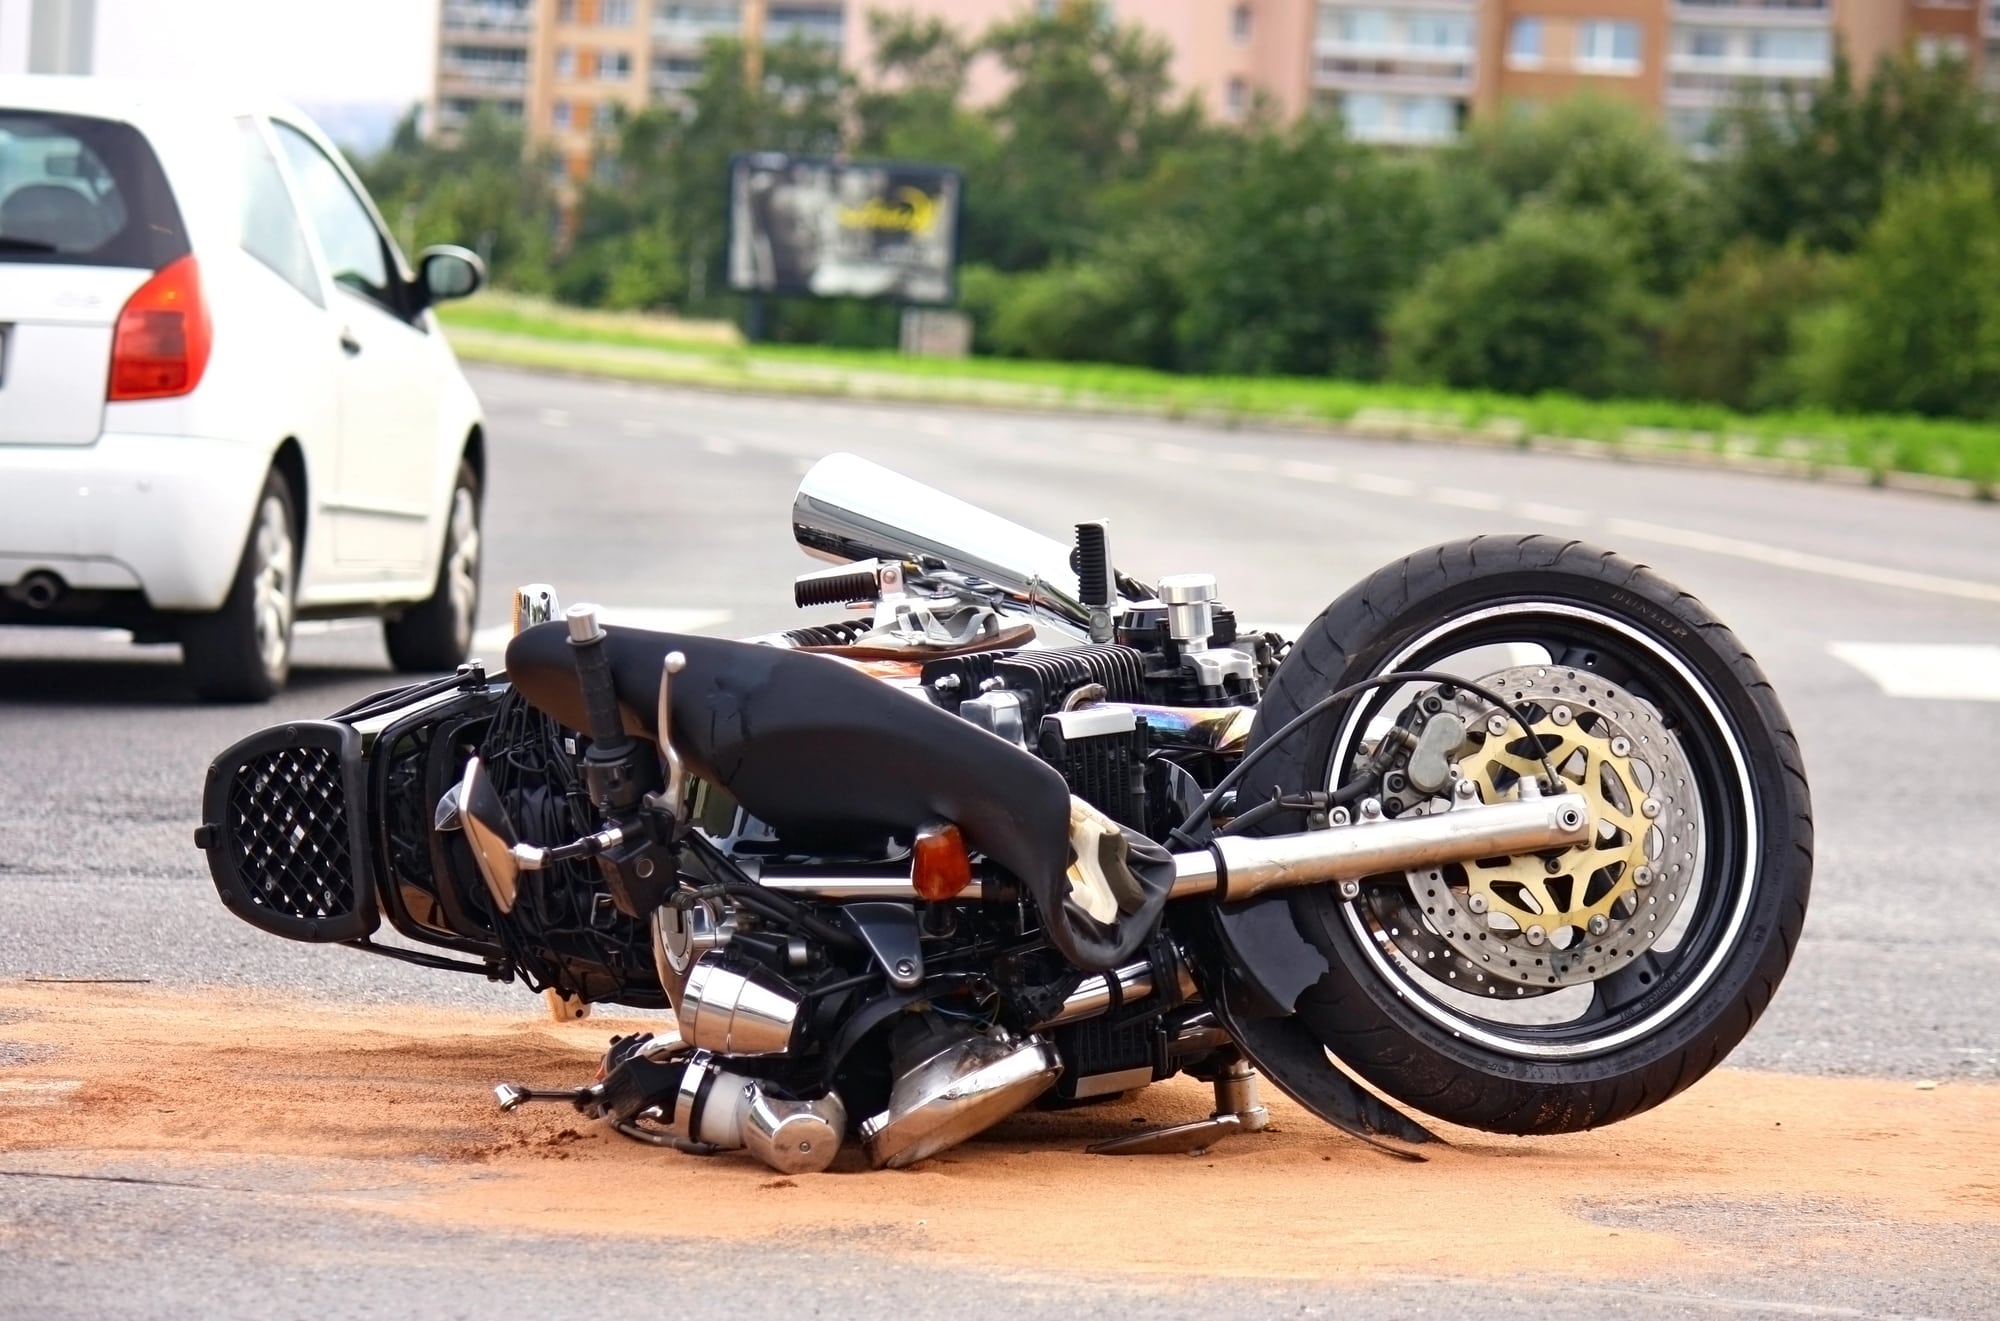 What Happens to Your Body in a Motorcycle Accident?